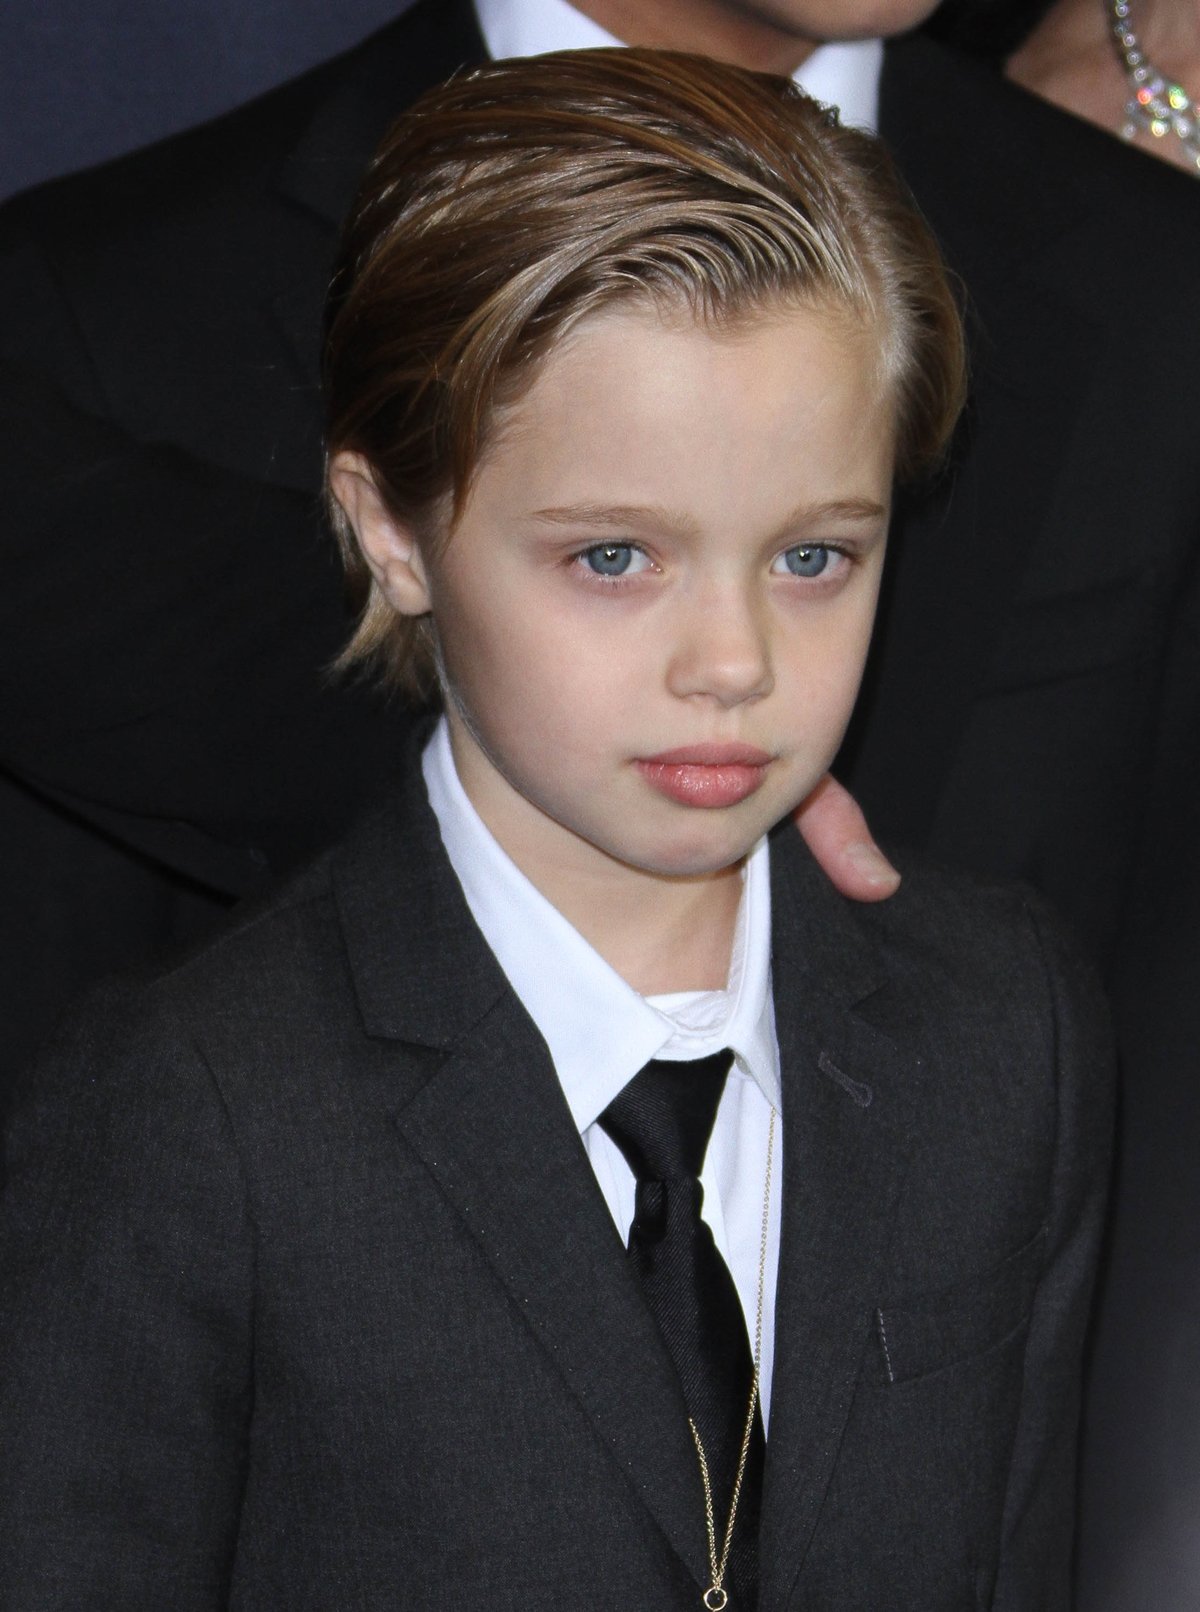 Shiloh Jolie-Pitt was 8 years old when she made her red carpet debut in a masculine black suit and tie at the Unbroken premiere